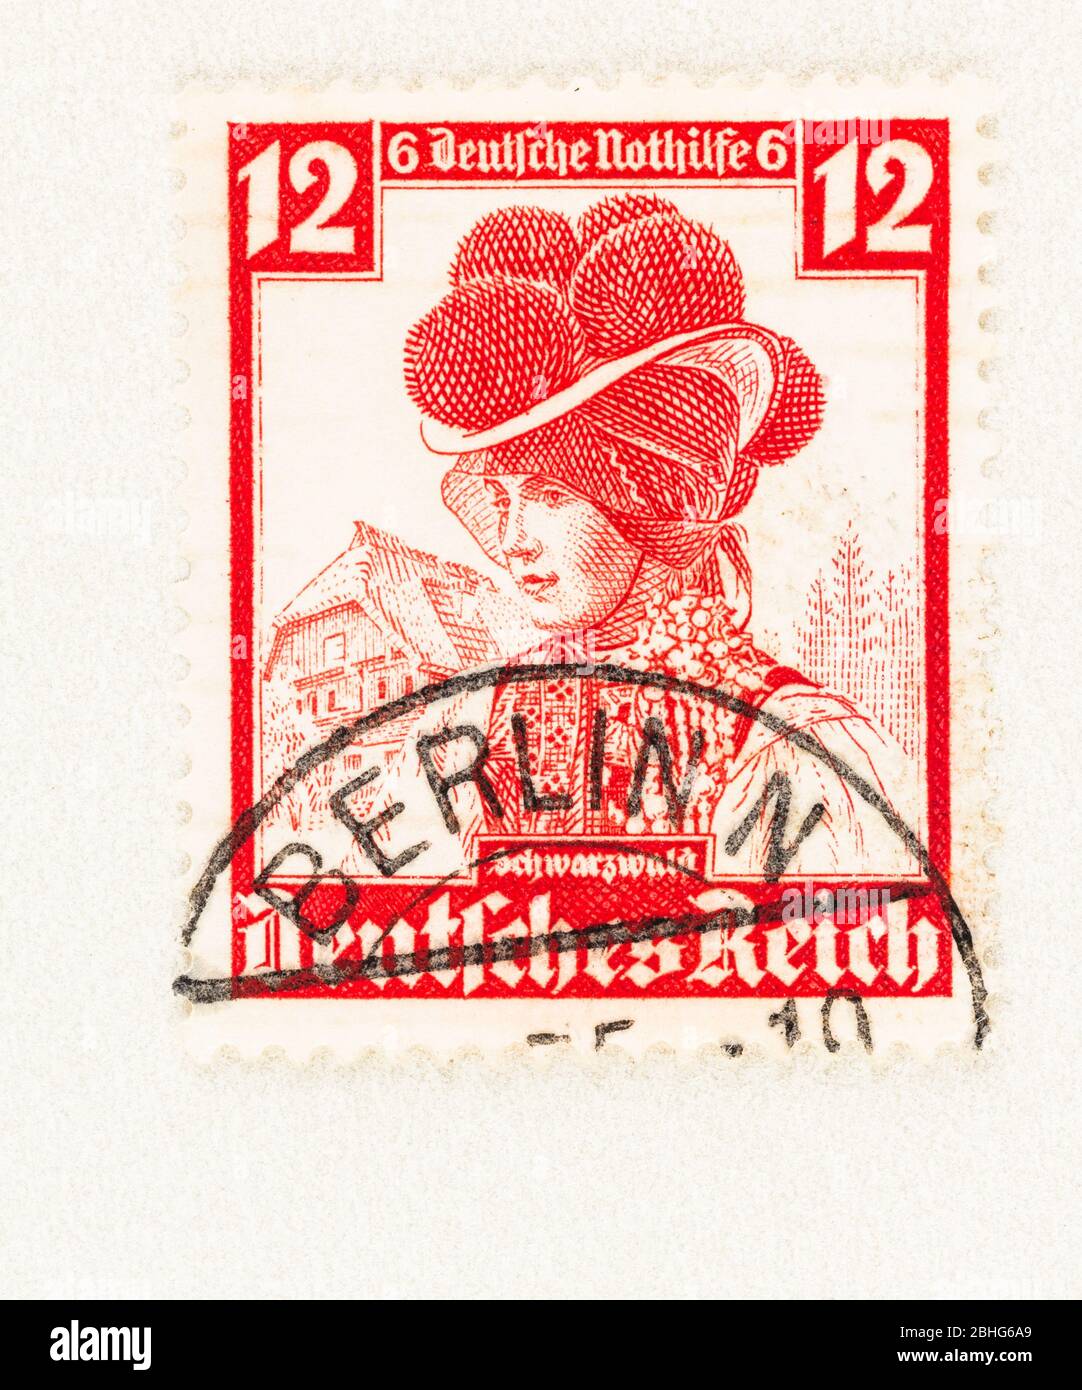 SEATTLE WASHINGTON - April 25, 2020: German Reich stamp  featuring  Gutachtal woman with bollen hat, a traditional headdress of the Balck Forest. Scot Stock Photo